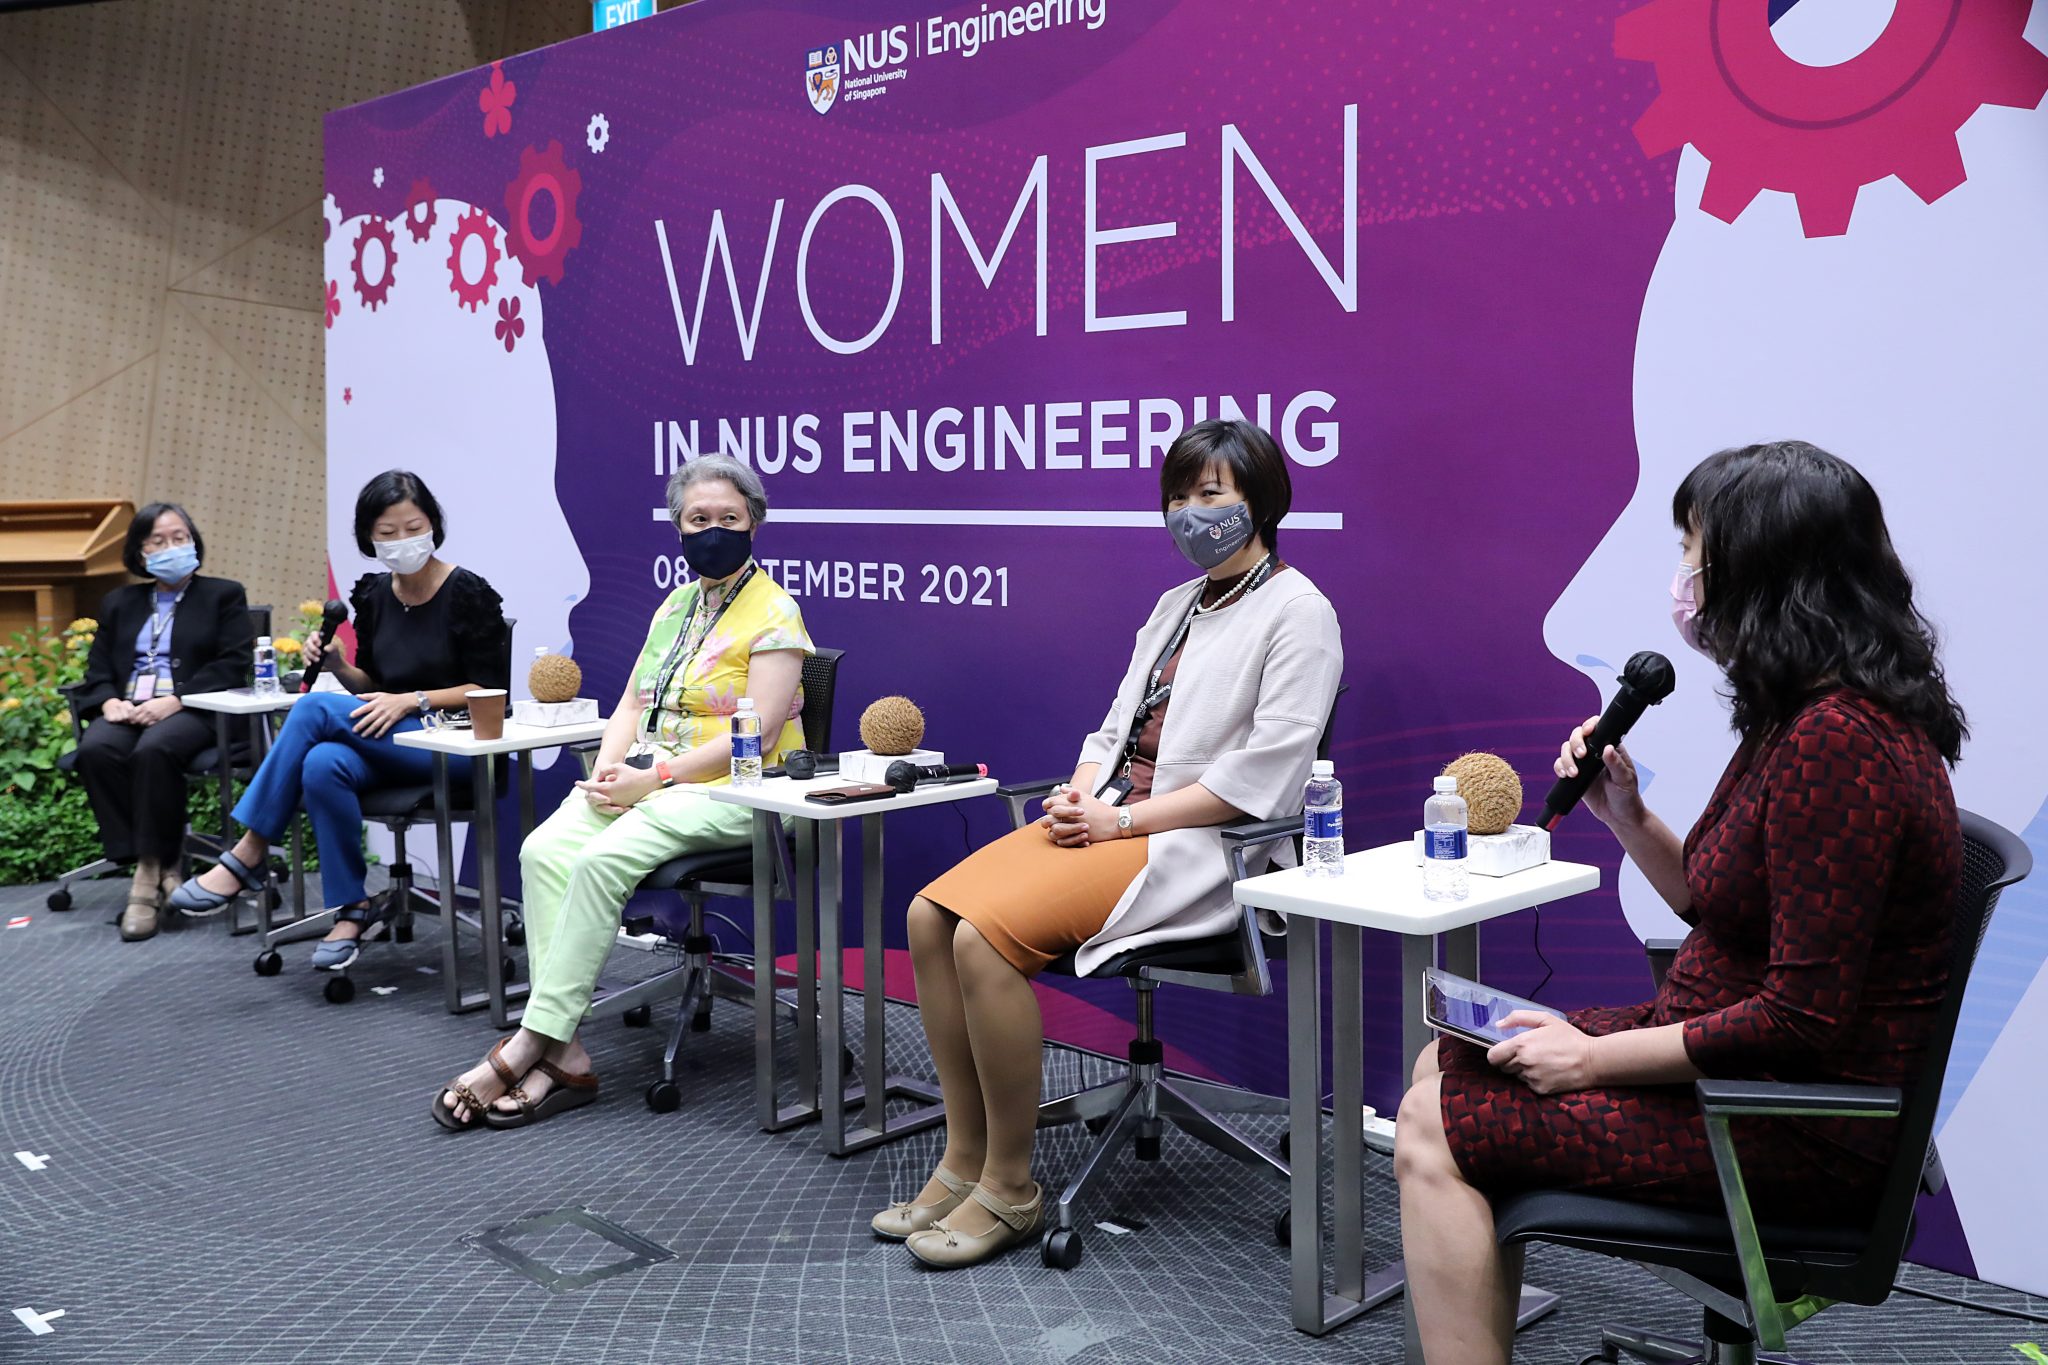 Each speaker is an award-winning NUS Engineering alumna, and shared inspiring stories from their time in university and their experiences navigating careers in engineering and other fields.